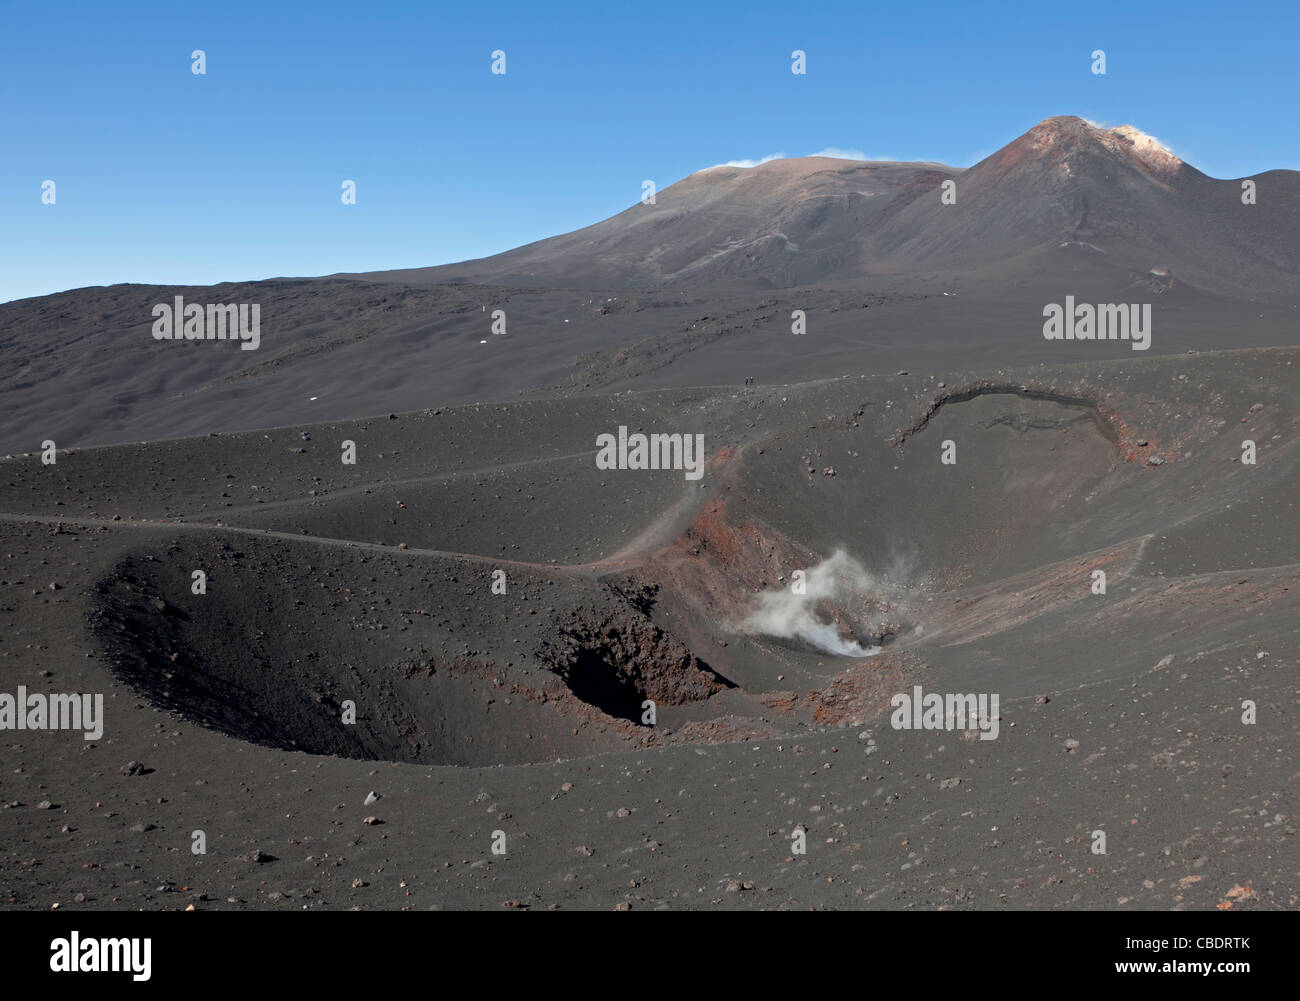 Volcanic crater from Mount Etna, Sicily, Italy Stock Photo